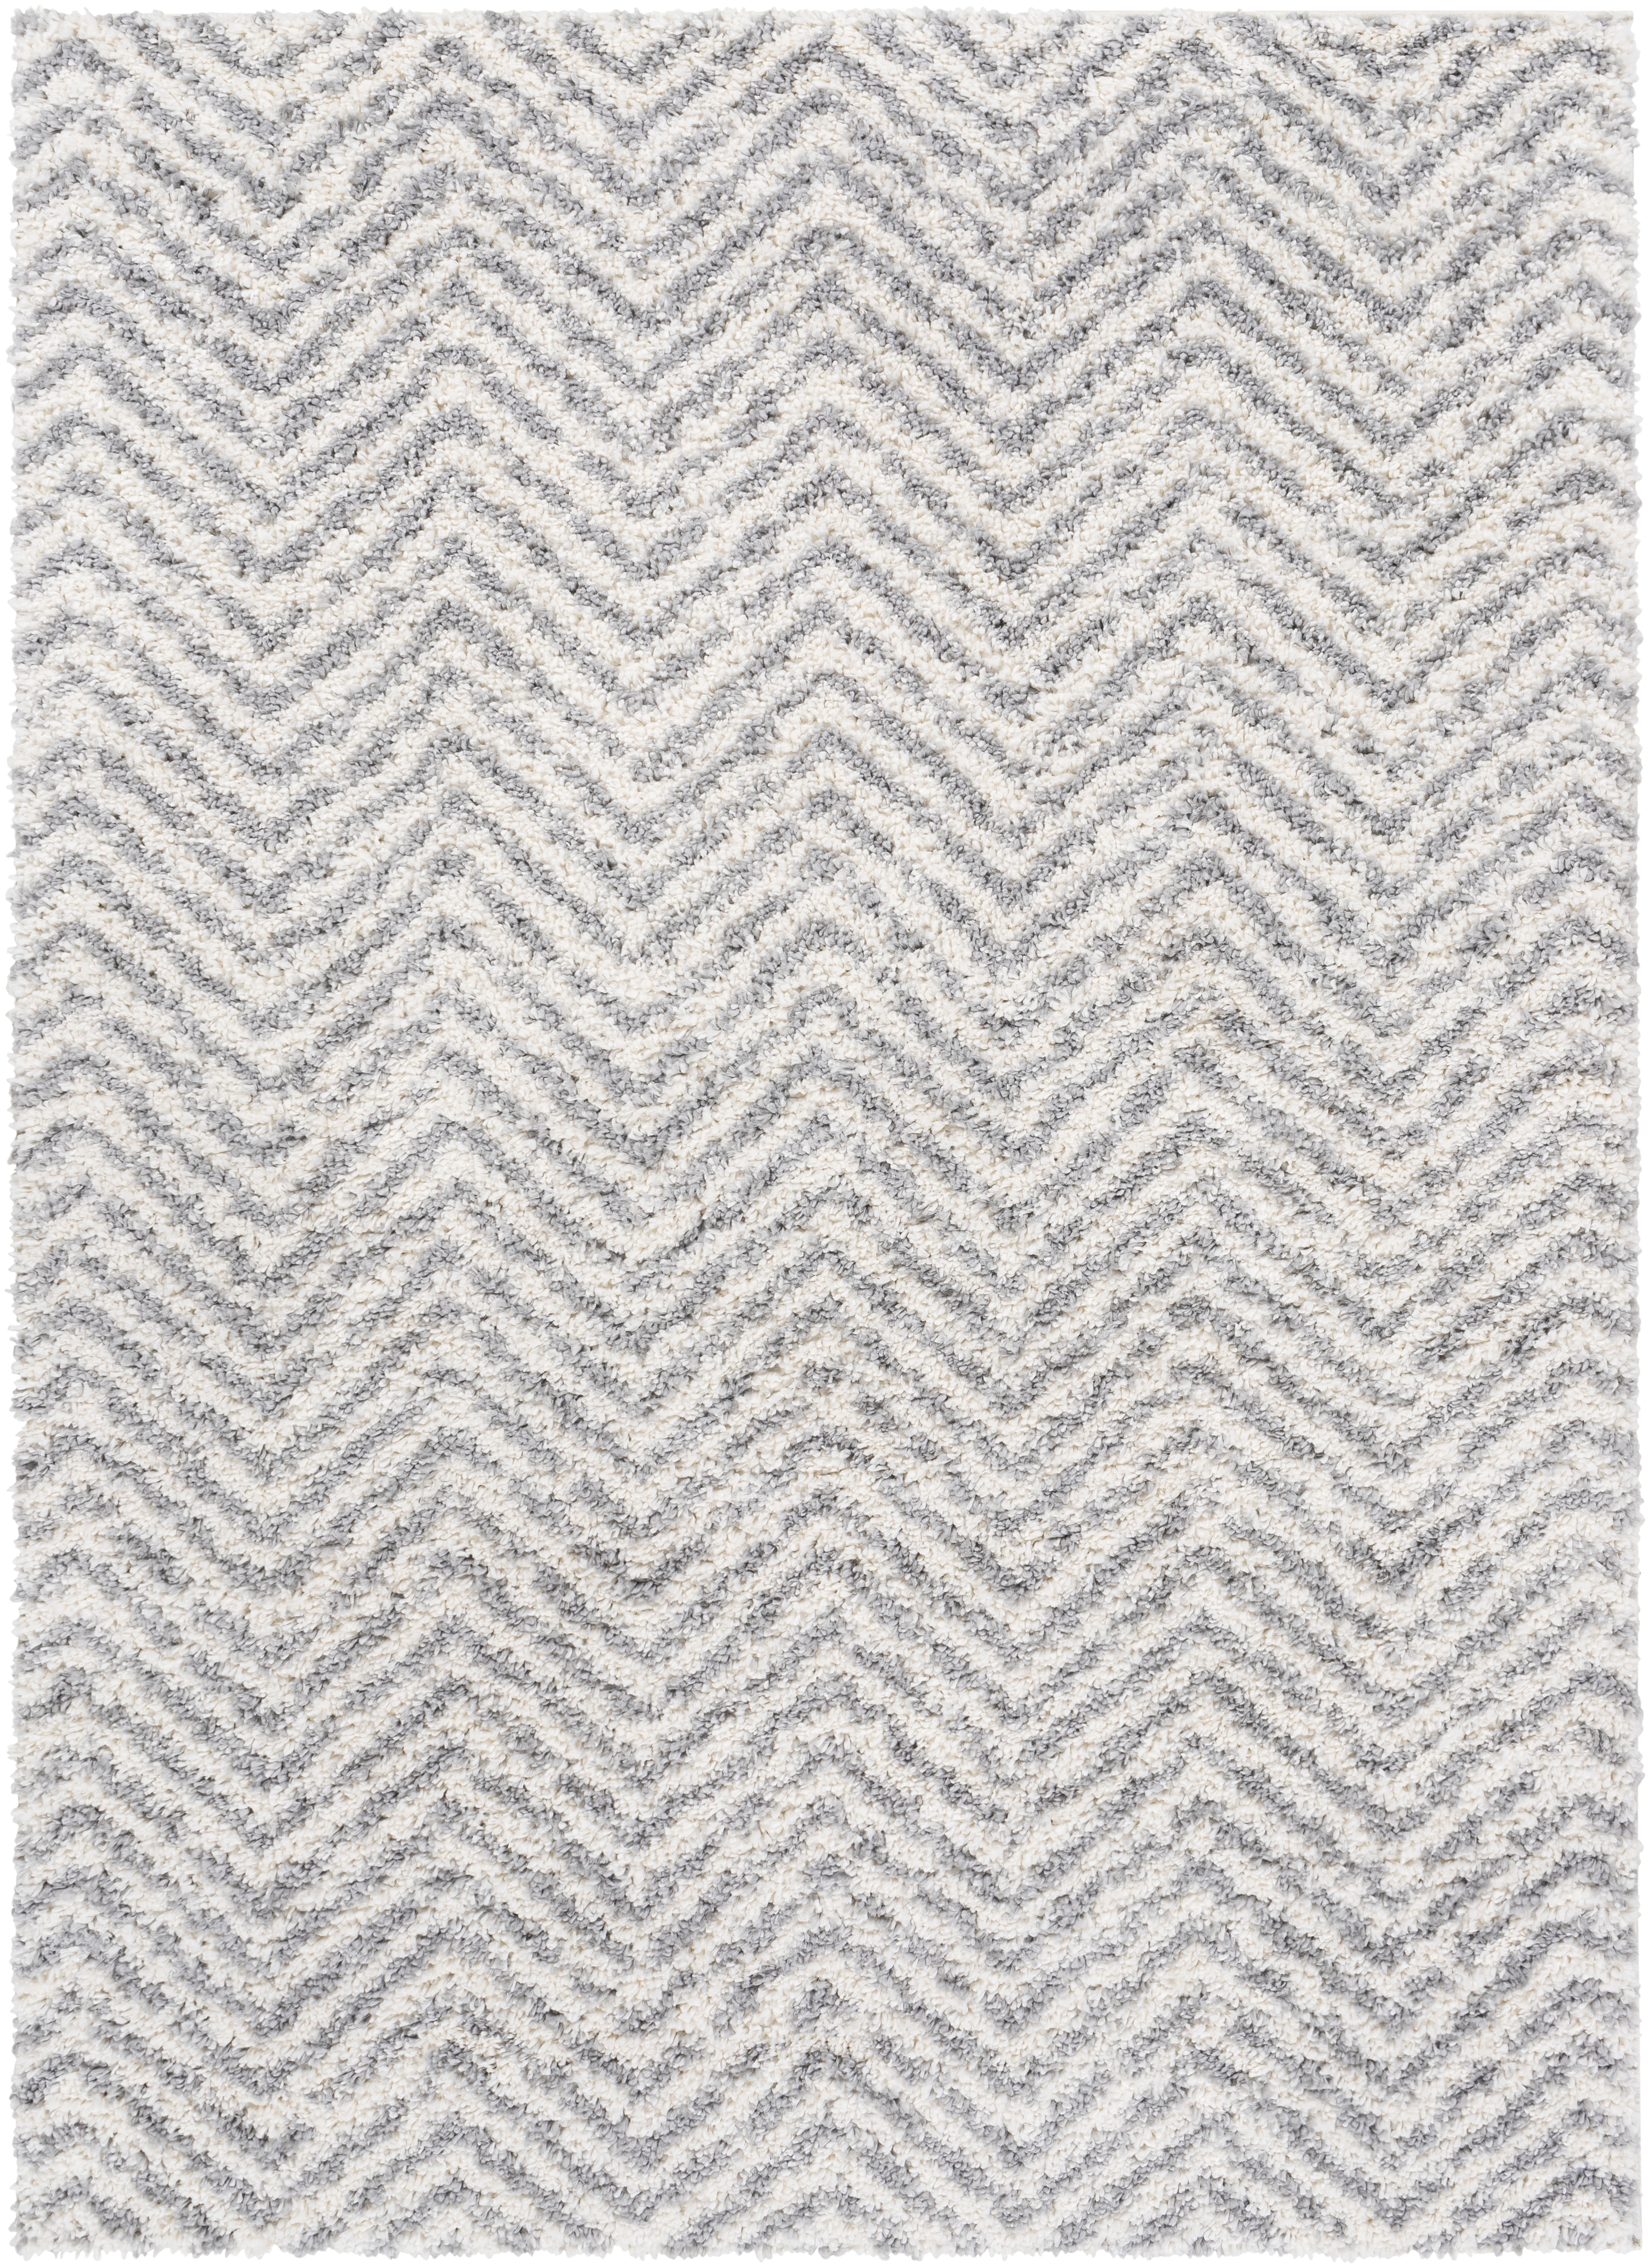 Deluxe Shag Rug, 2' x 3' - Image 0